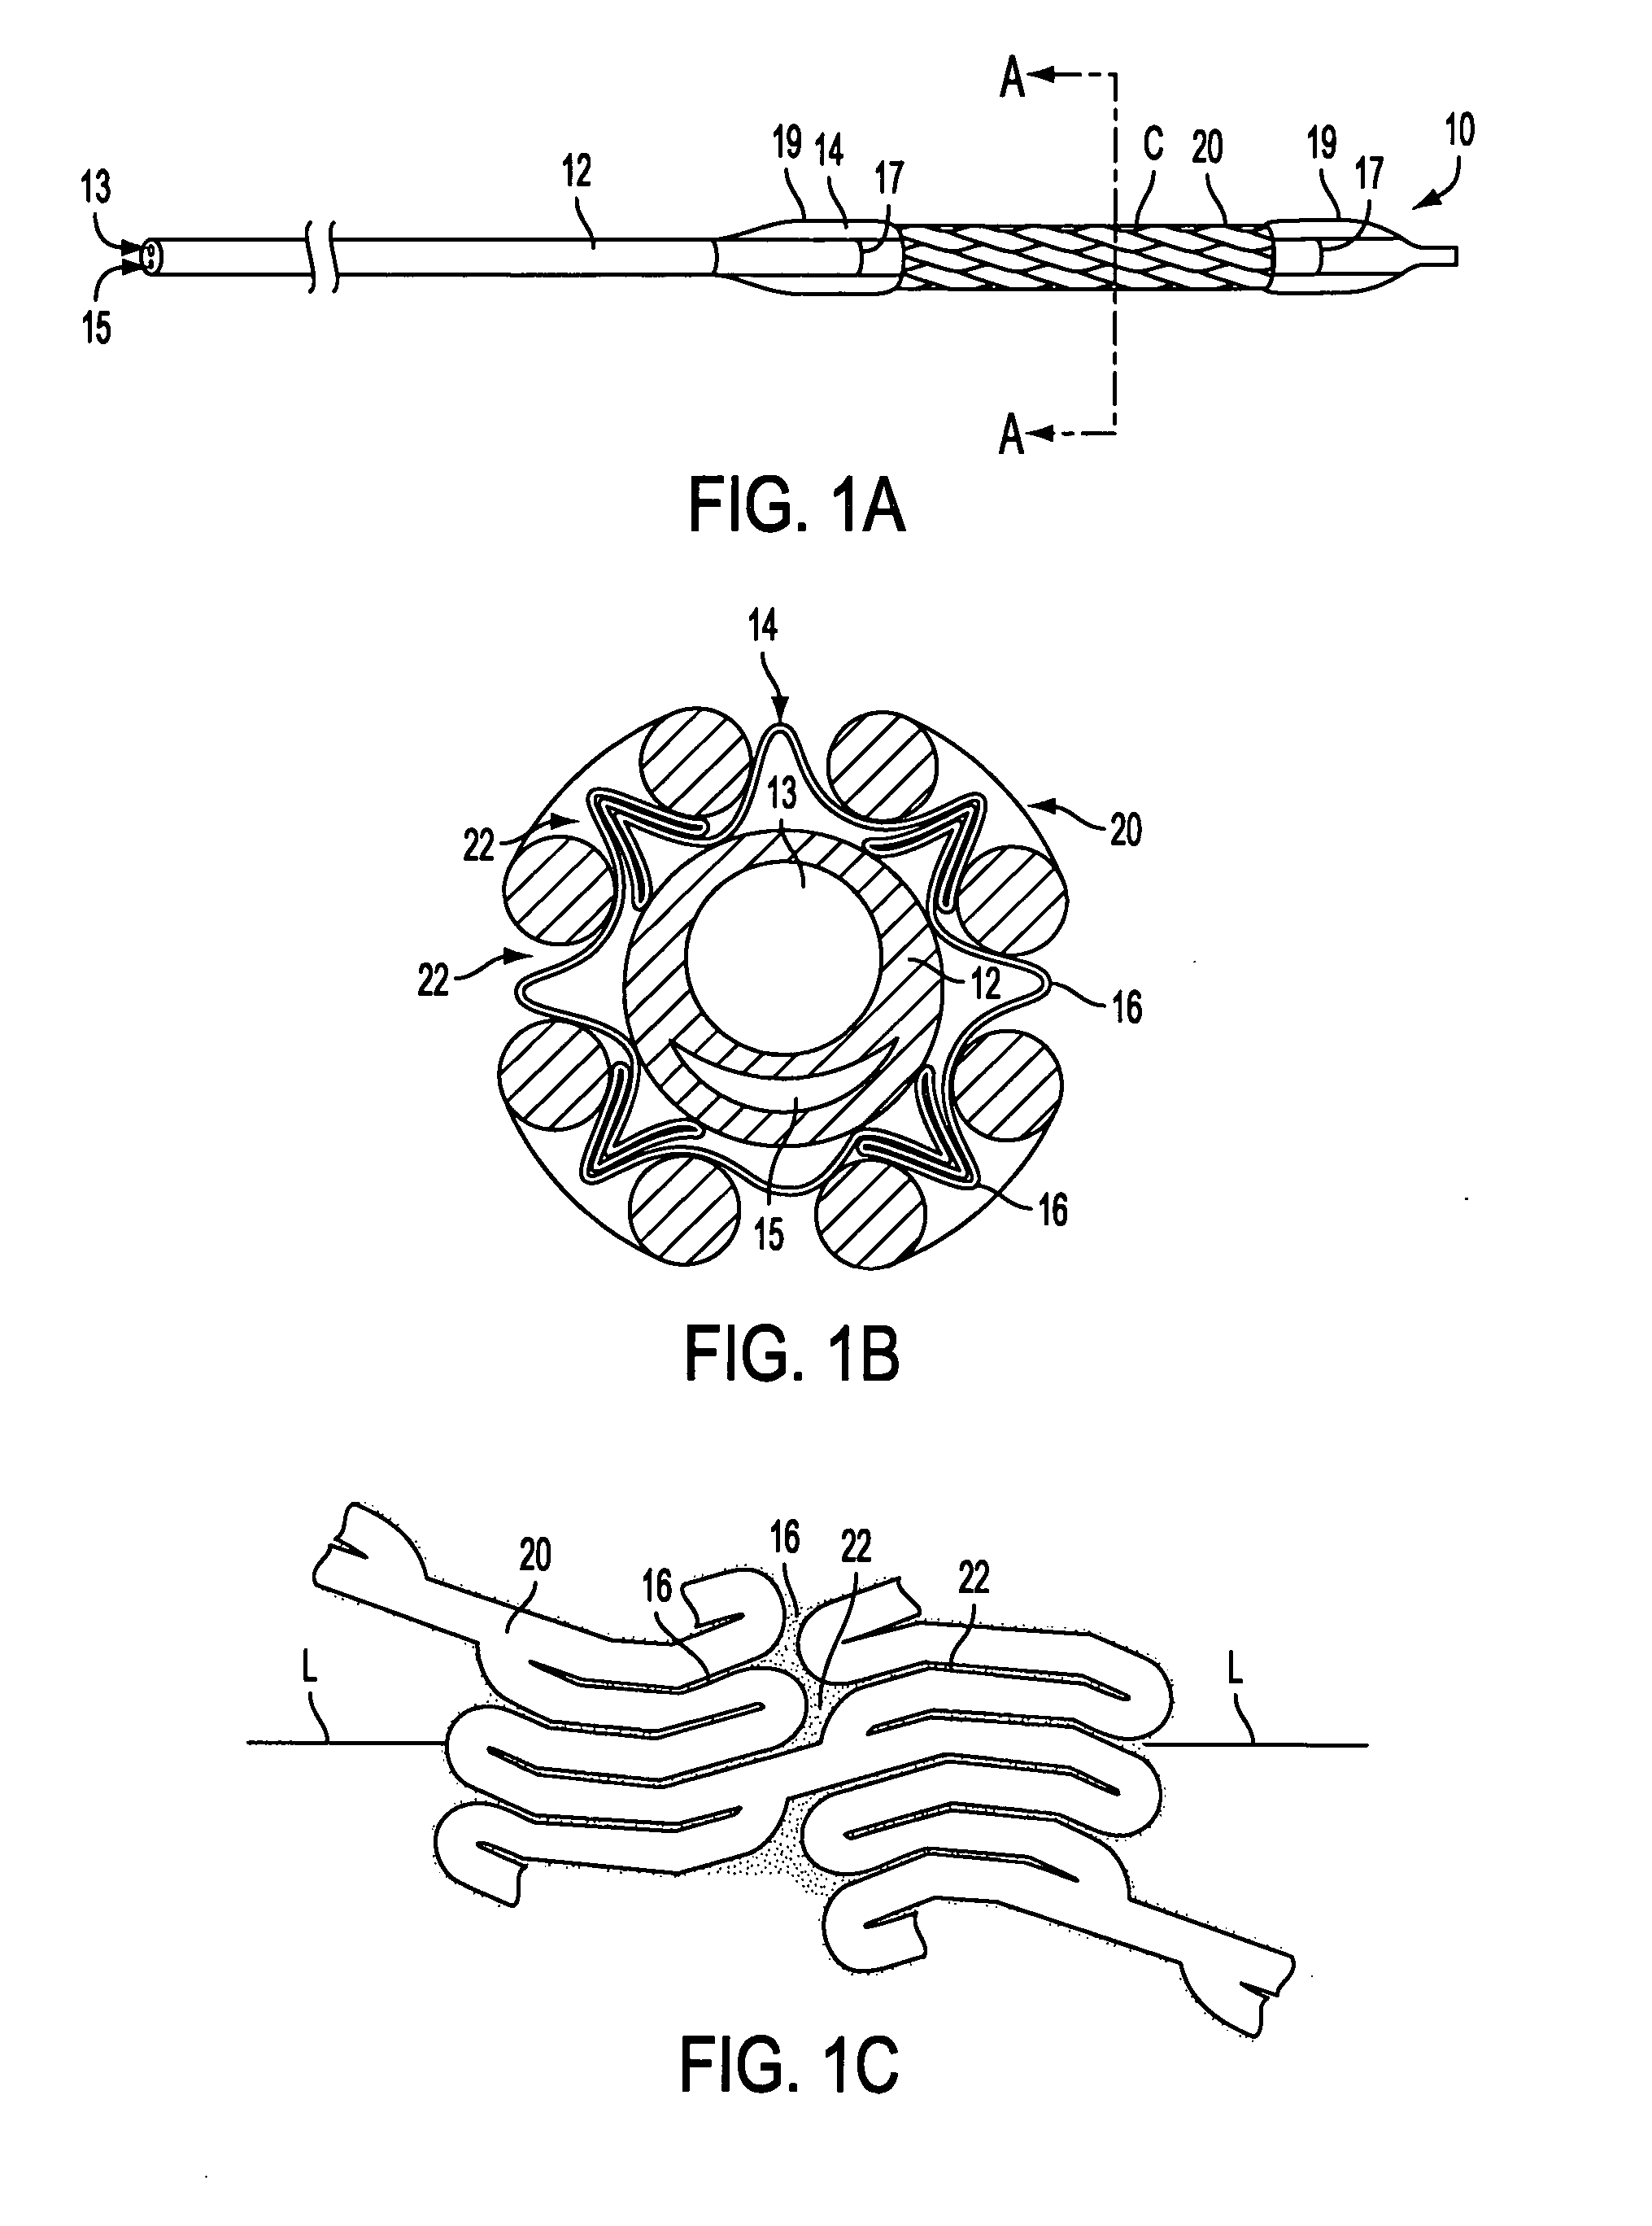 Cold-molding process for loading a stent onto a stent delivery system